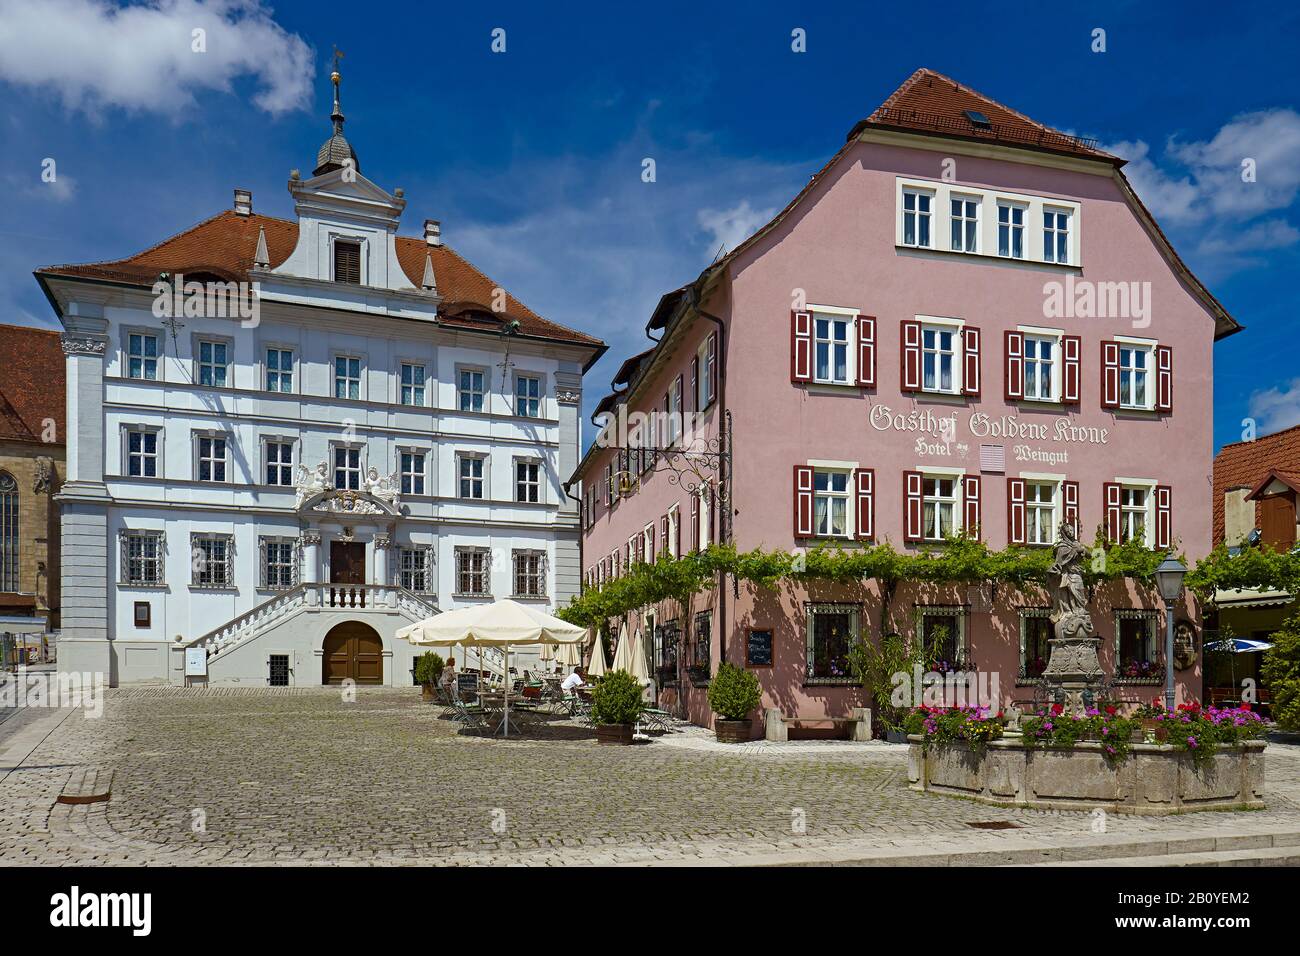 Town hall and Gasthaus Goldene Krone with Marienbrunnen at the market in Iphofen, Lower Franconia, District of Kitzingen, Bavaria, Germany, Stock Photo